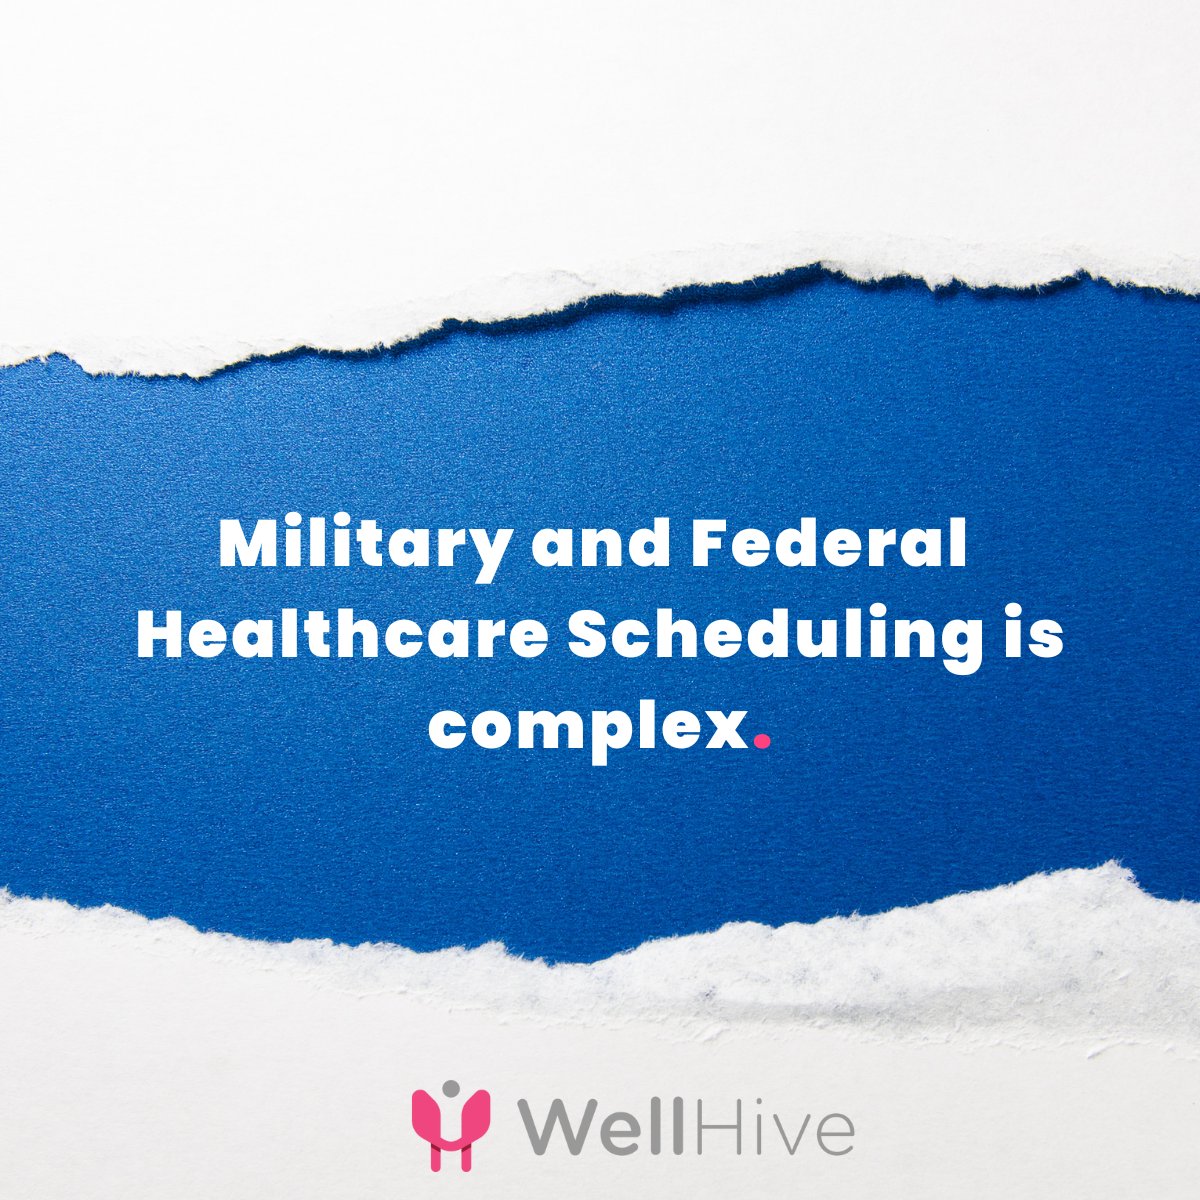 Military and Federal healthcare scheduling is complex. It's time to explore new innovative solutions to help streamline this process. WellHive.com . . . #FederalHealth #Scheduling #Healthcare